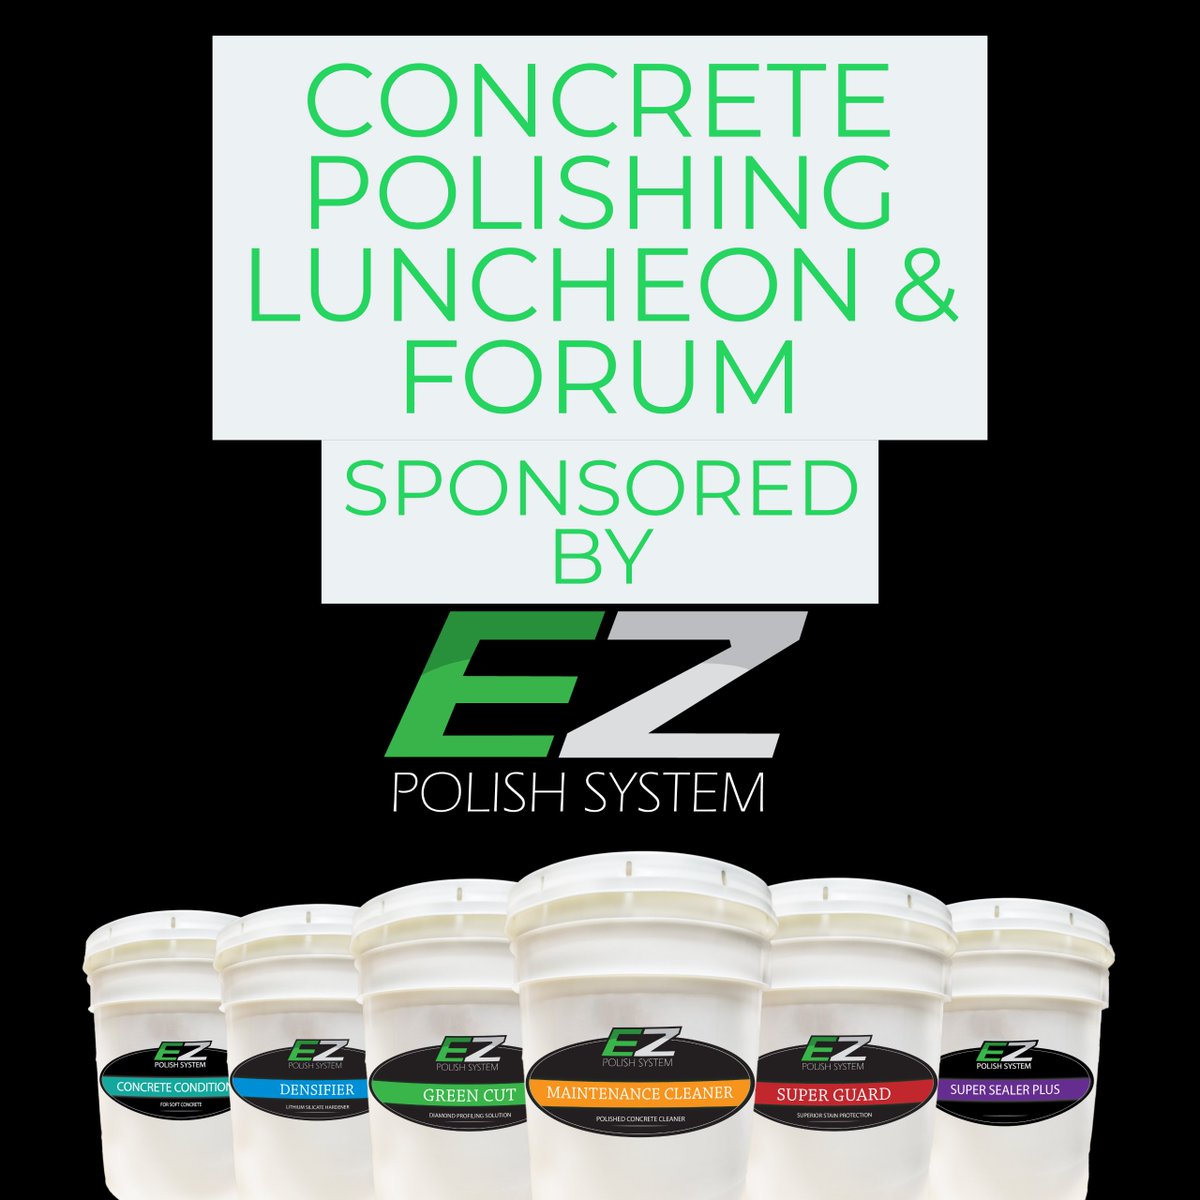 Did you know we are sponsoring the Concrete Polishing Luncheon & Forum at World of Concrete? Its not to late to buy your tickets! Visit worldofconcrete.com to get your tickets today! #worldofconcrete #worldofconcrete2019 #cement #polishedcement